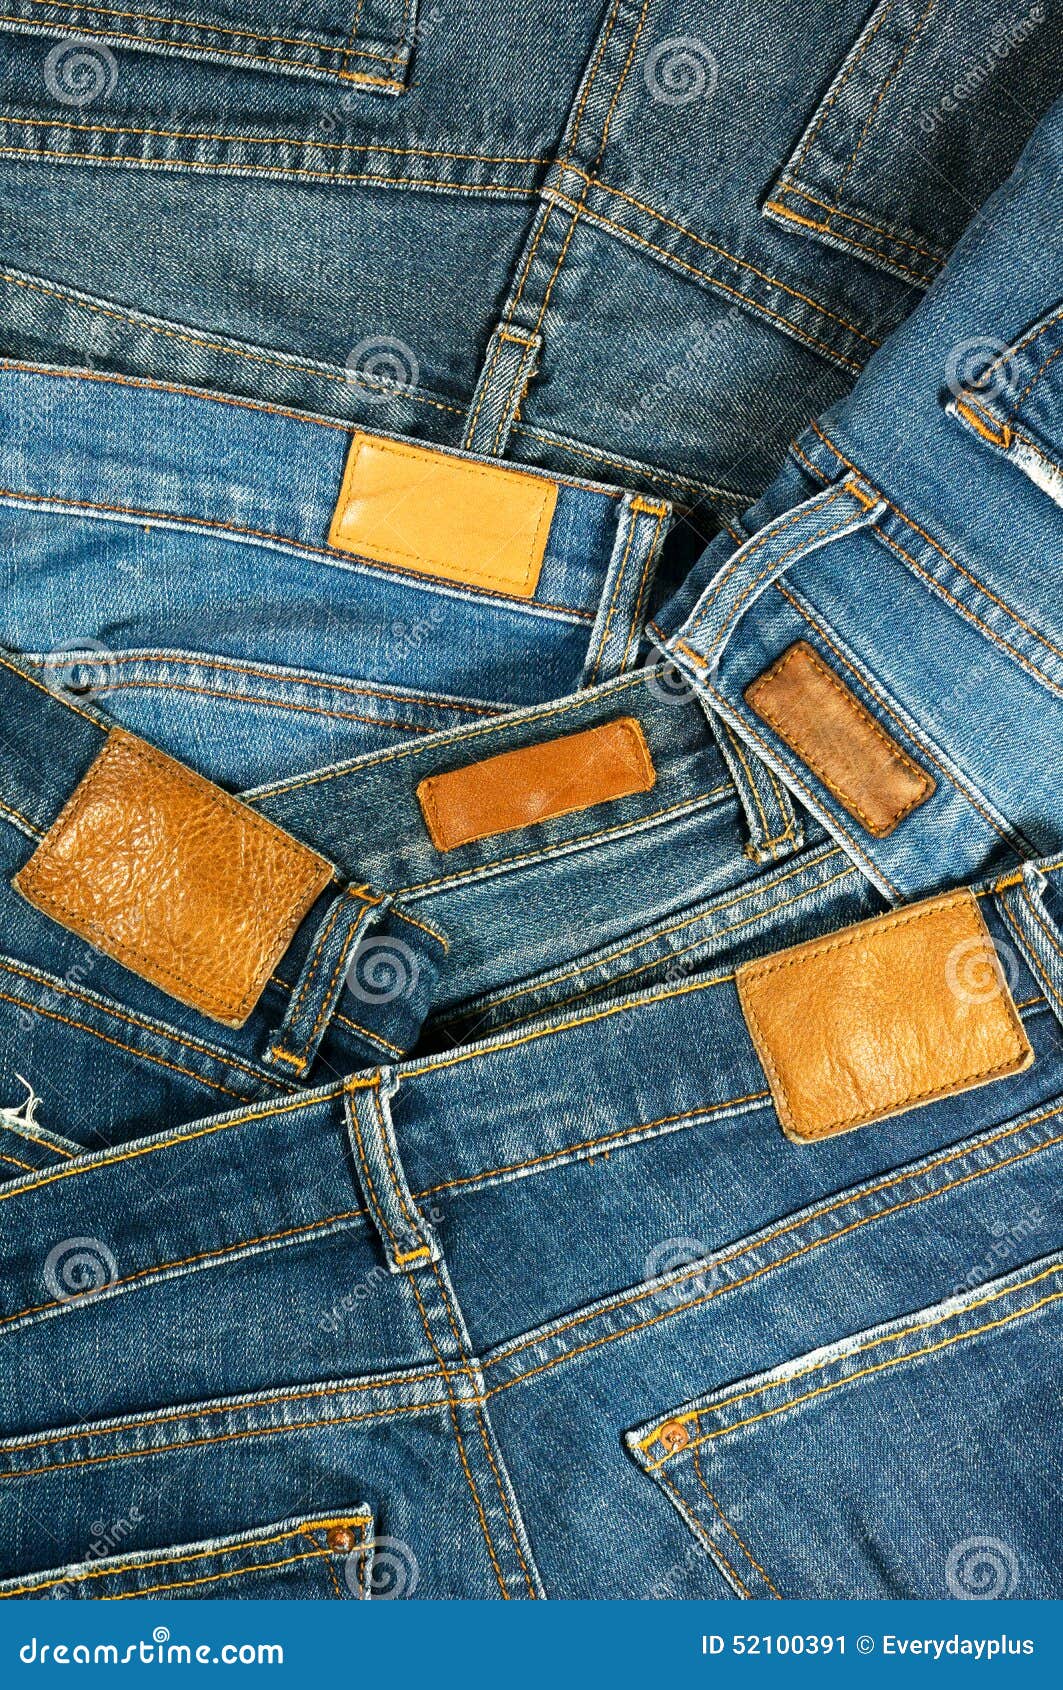 Pile of Blue Jeans with Label Stock Image - Image of fabric, garment ...